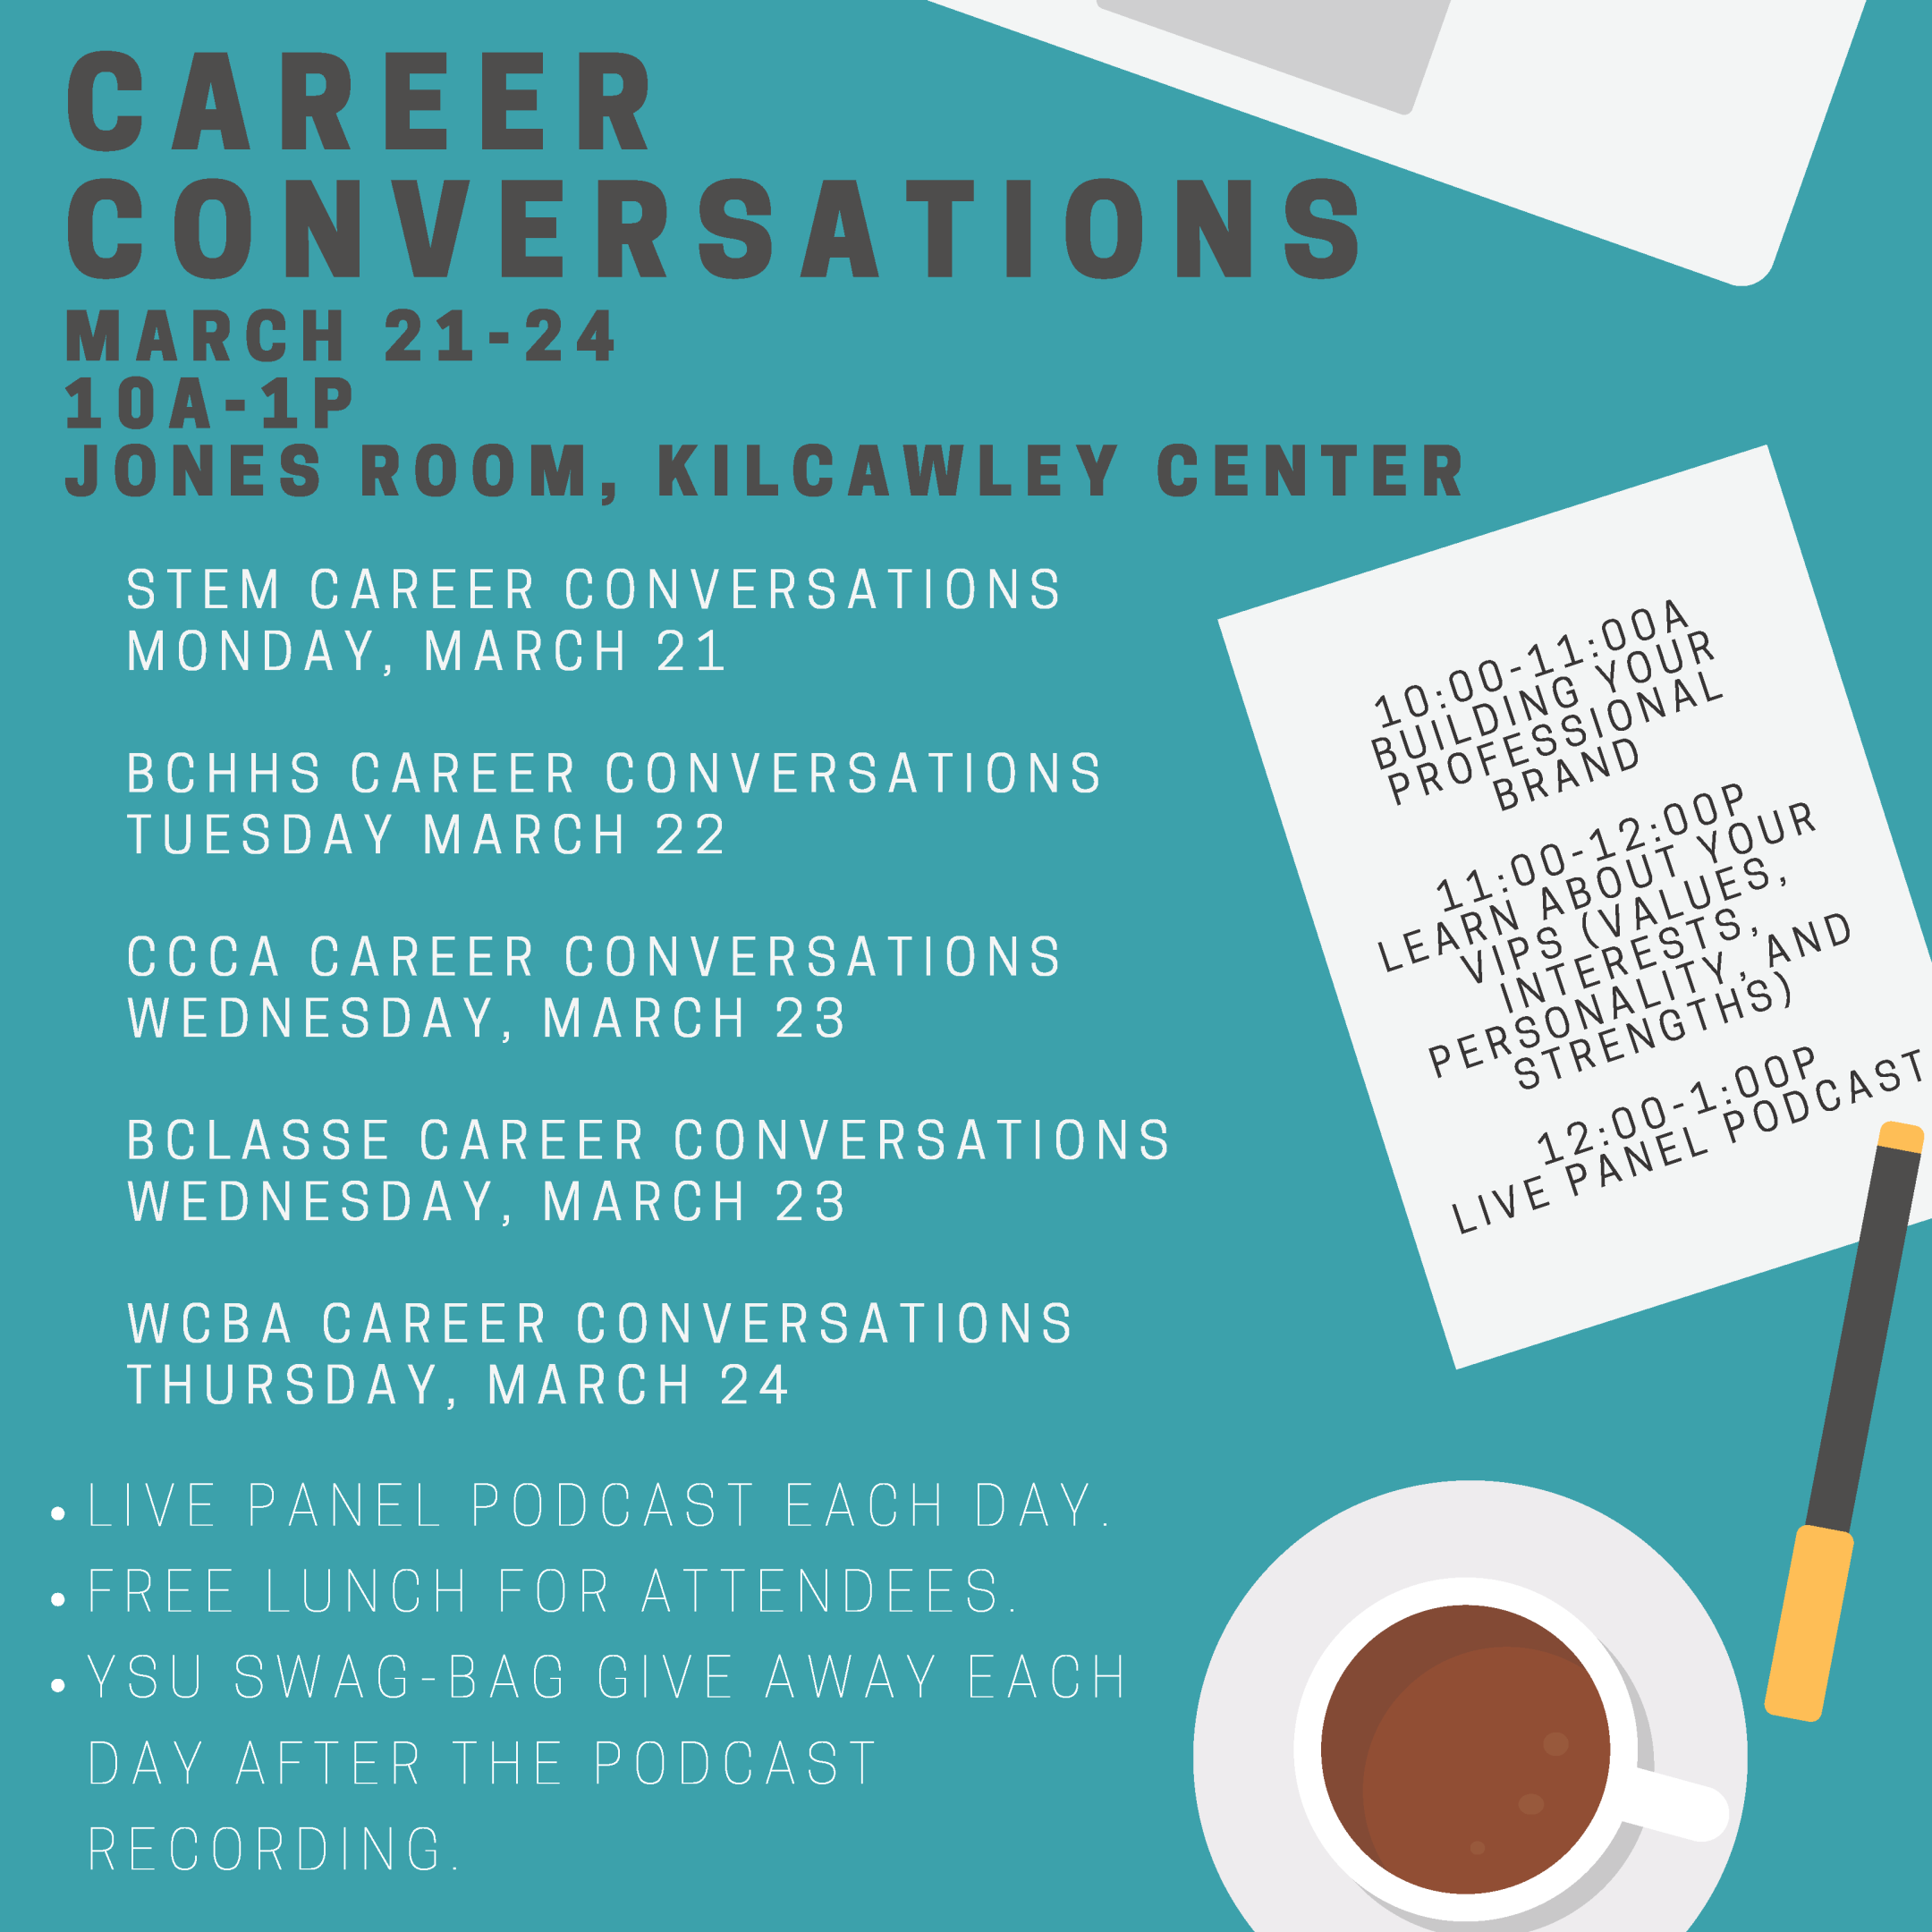 Career Conversations March 21-24